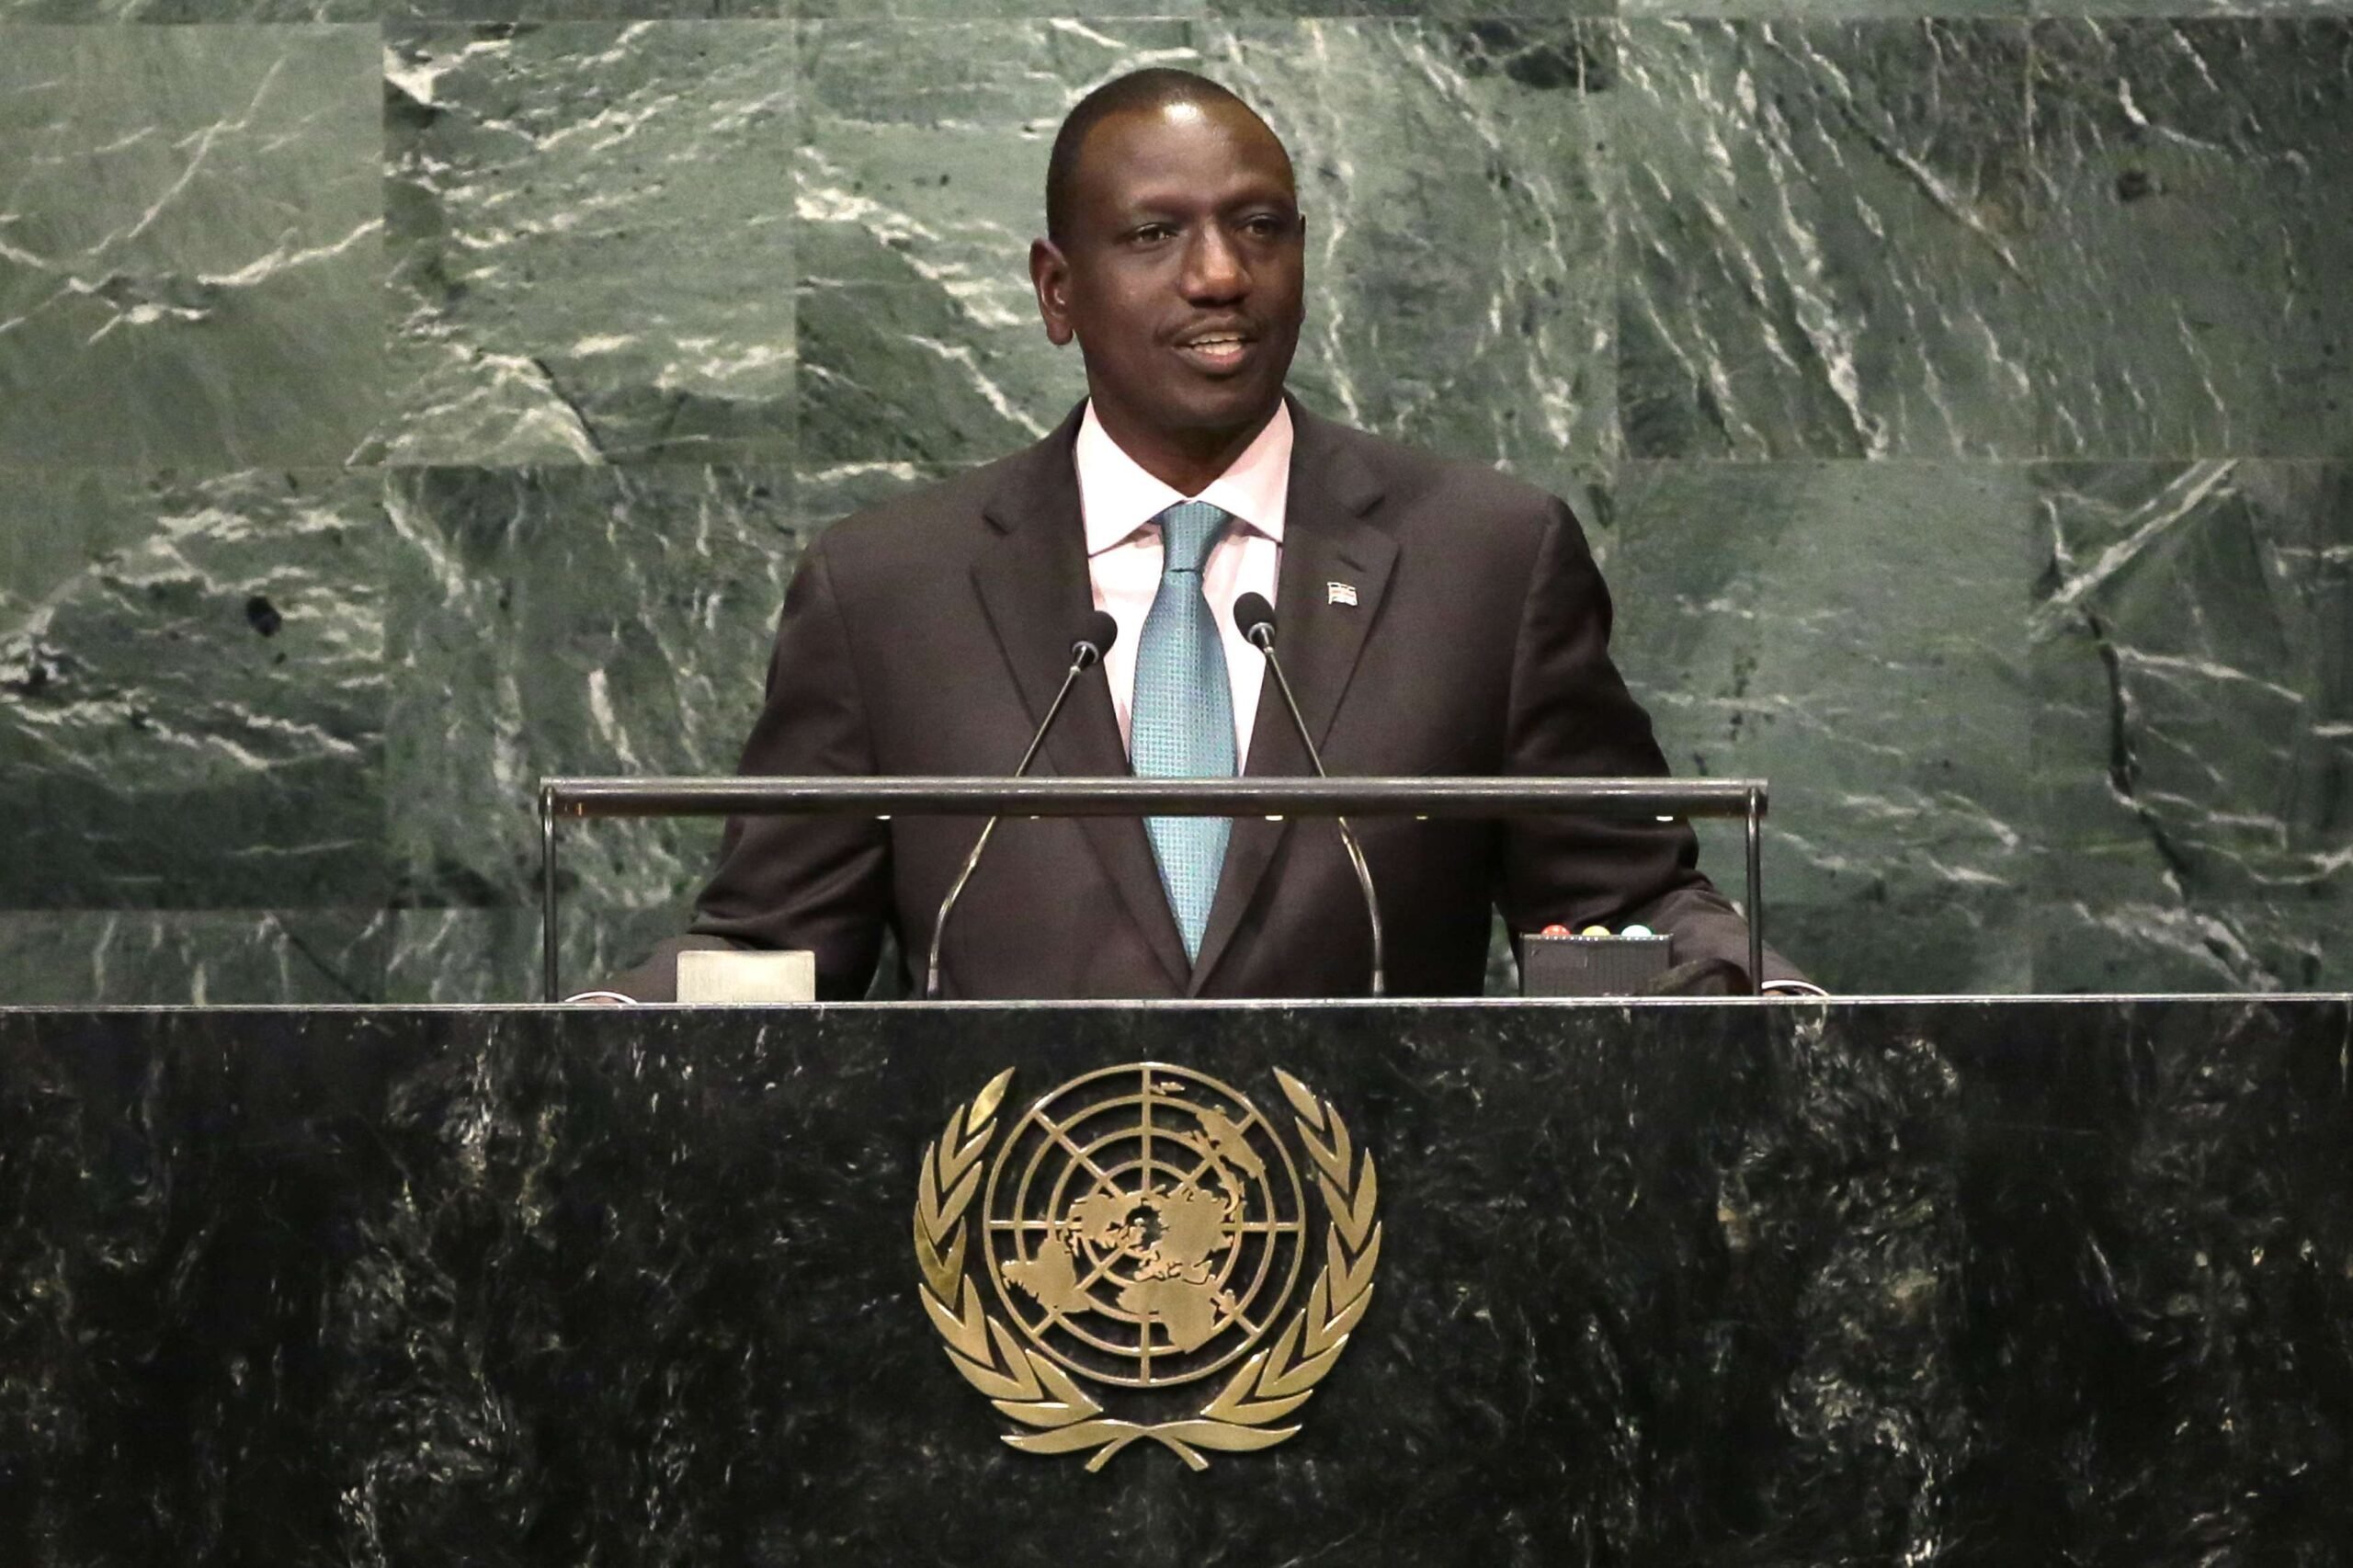 Kenyan President, William Ruto, set to discuss climate change at the 77th United Nations General Assembly